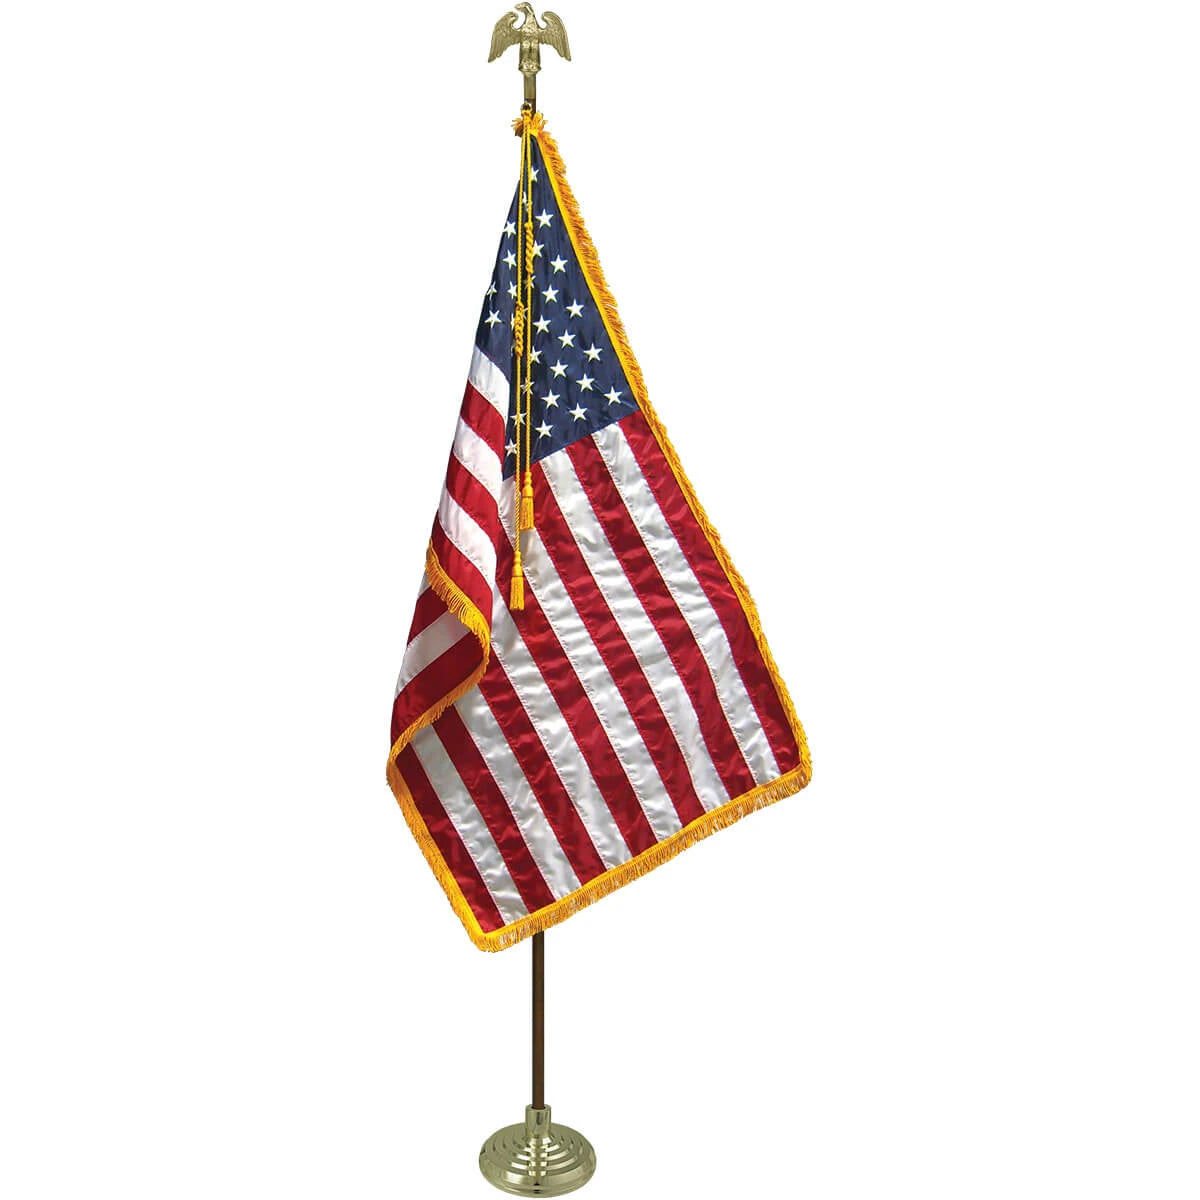 An image of a Freedom American Deluxe Indoor flags set, complete with floor stand, oak pole, eagle ornamernt, chord and tassels, and a deluxe indoor nylon American Flag with gold fringe.